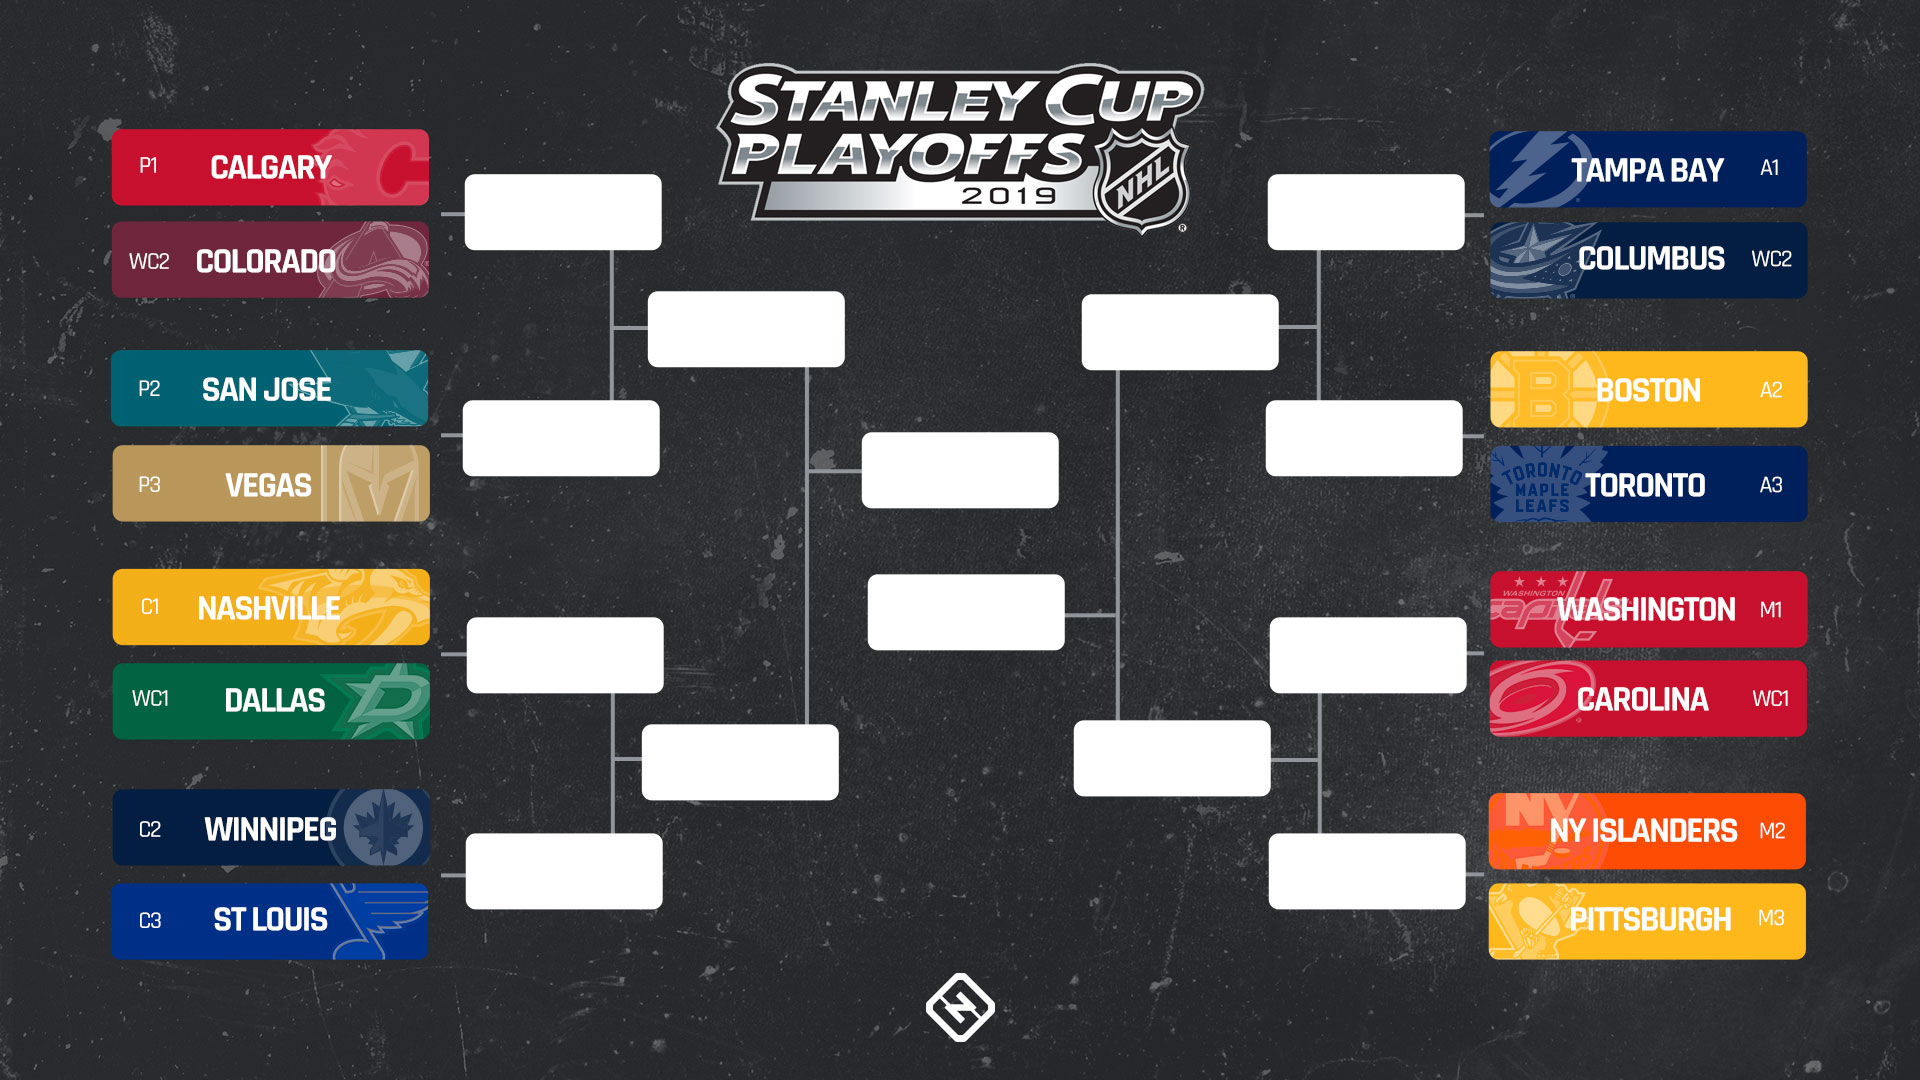 NHL playoffs schedule 2019 Full bracket, dates, times, TV channels for